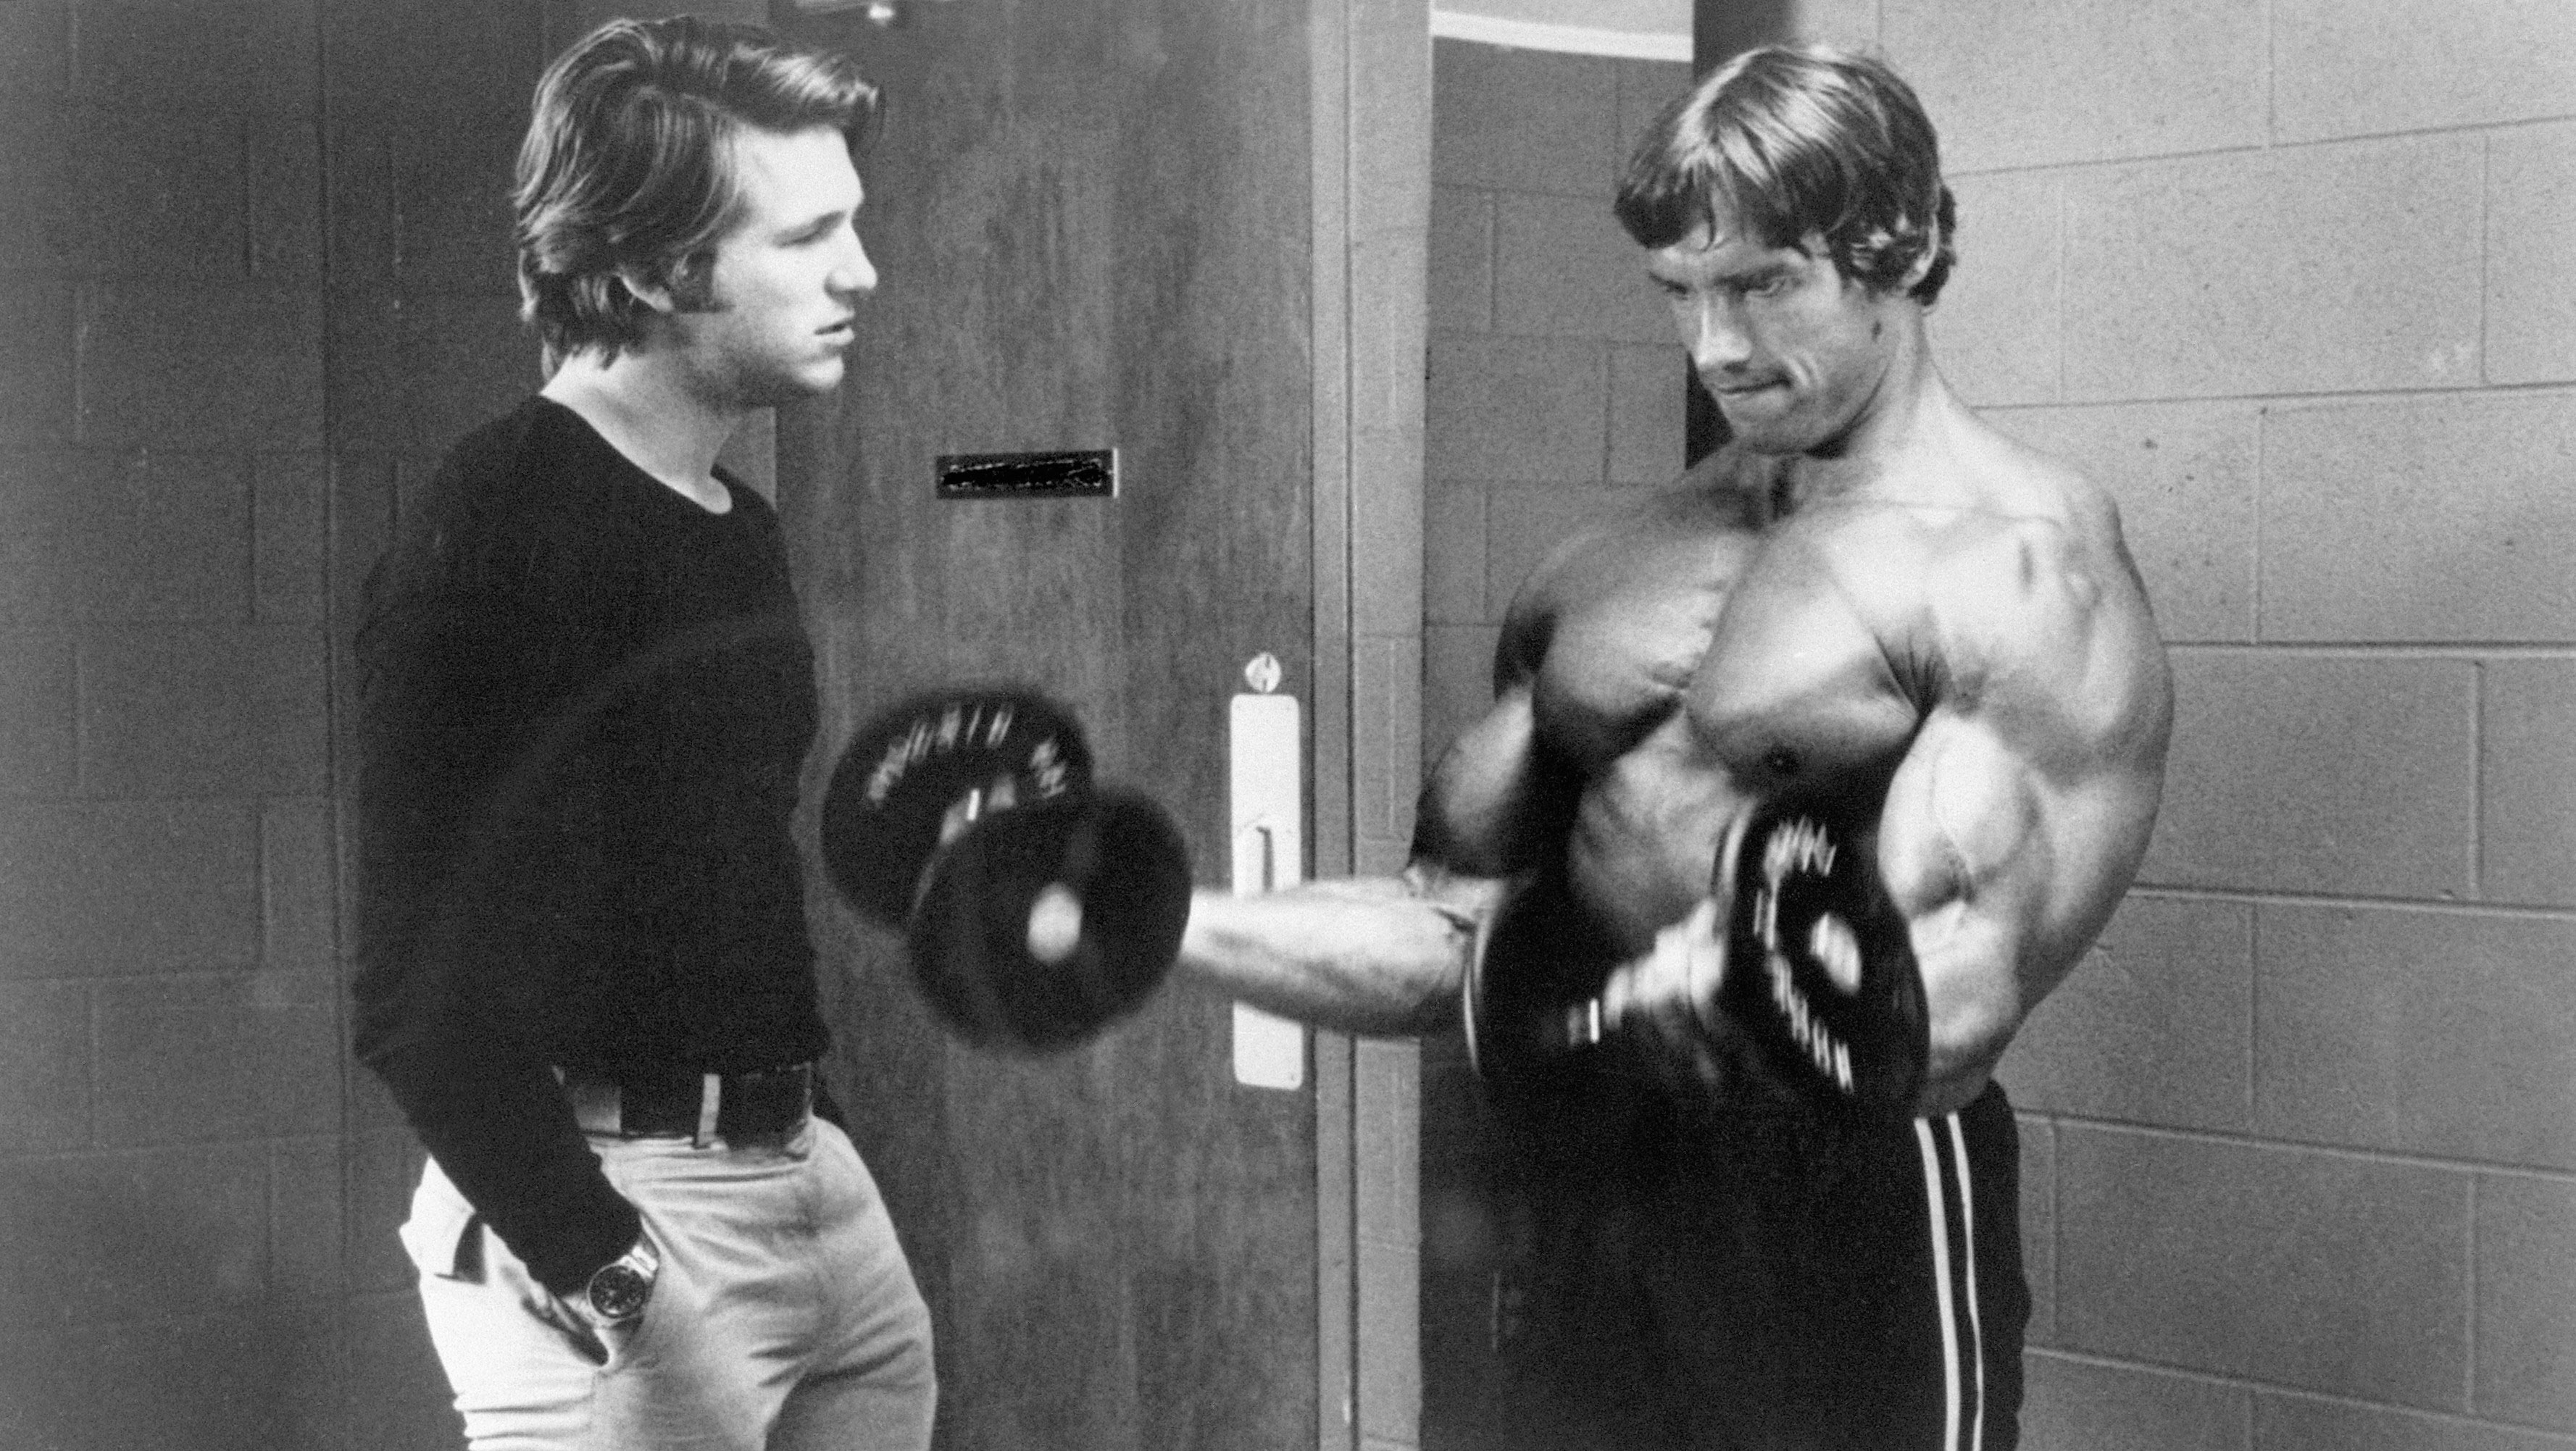 The Top 10 Movies Every Bodybuilder Must